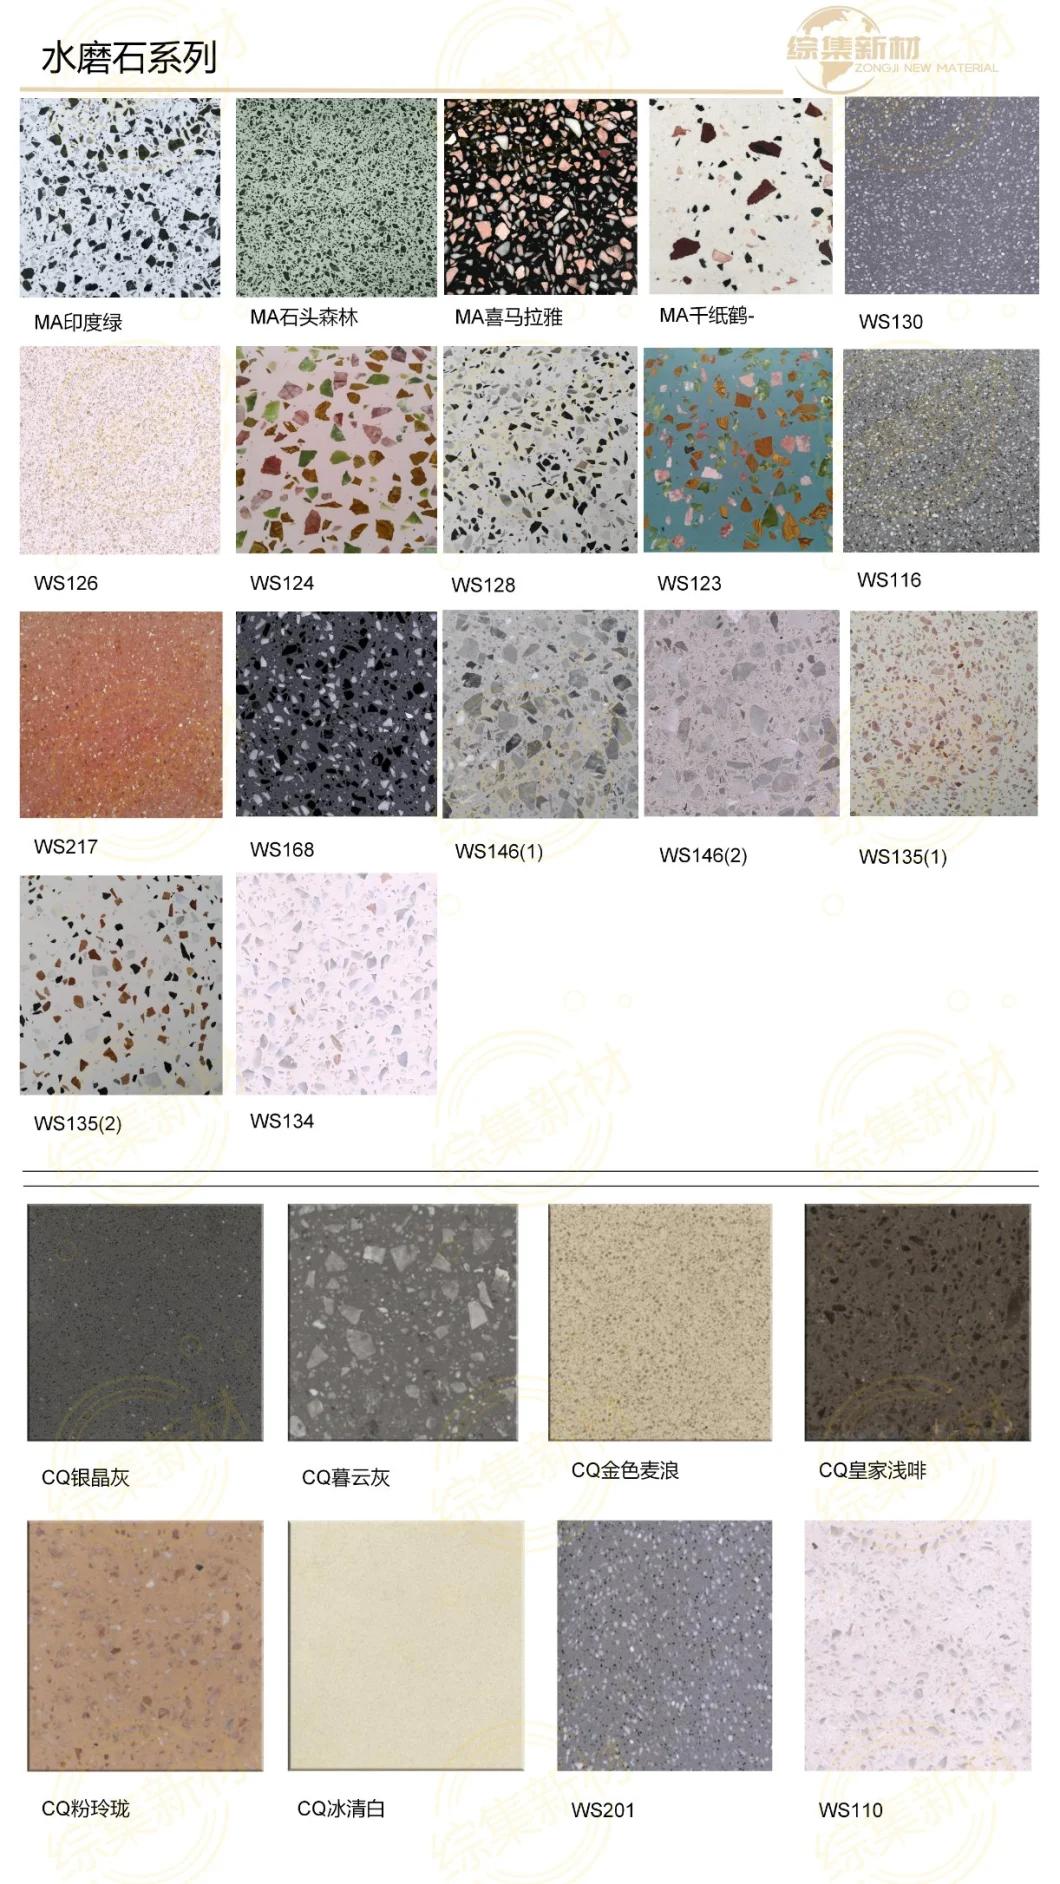 Modern Artificial Terrazzo and Cement Stone for Outdoor Interior Design Construction Work